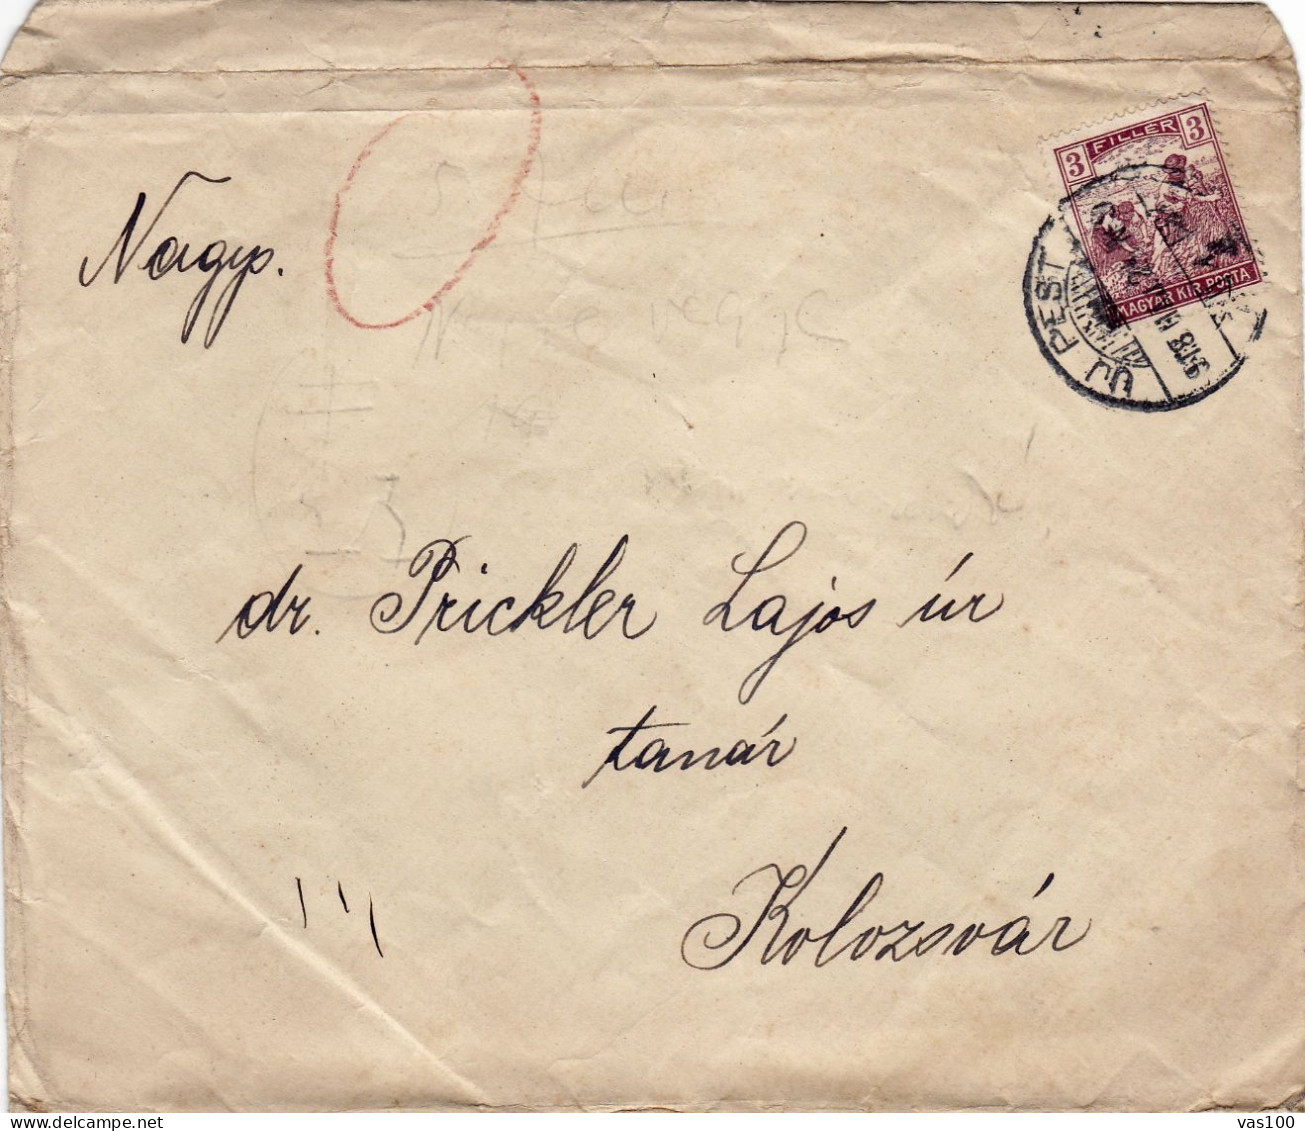 GRAINS HARVESTERS STAMPS ON  COVER / 3 FILER 1918,HUNGARY - Covers & Documents